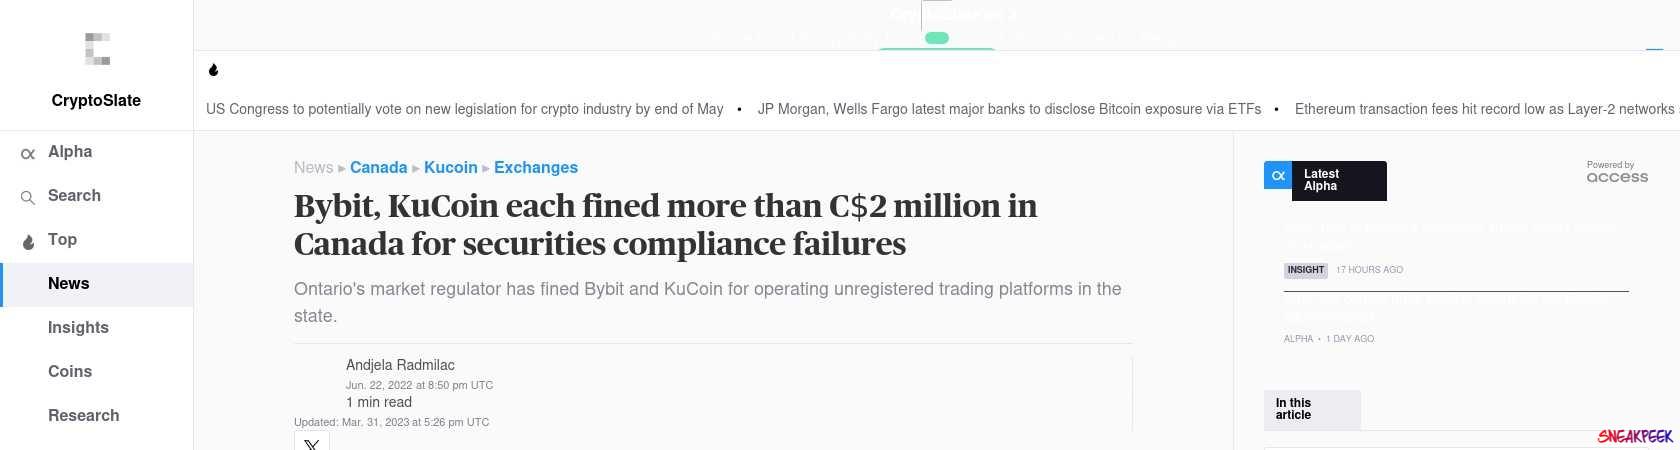 Read the full Article:  ⭲ Bybit, KuCoin each fined more than C$2 million in Canada for securities compliance failures